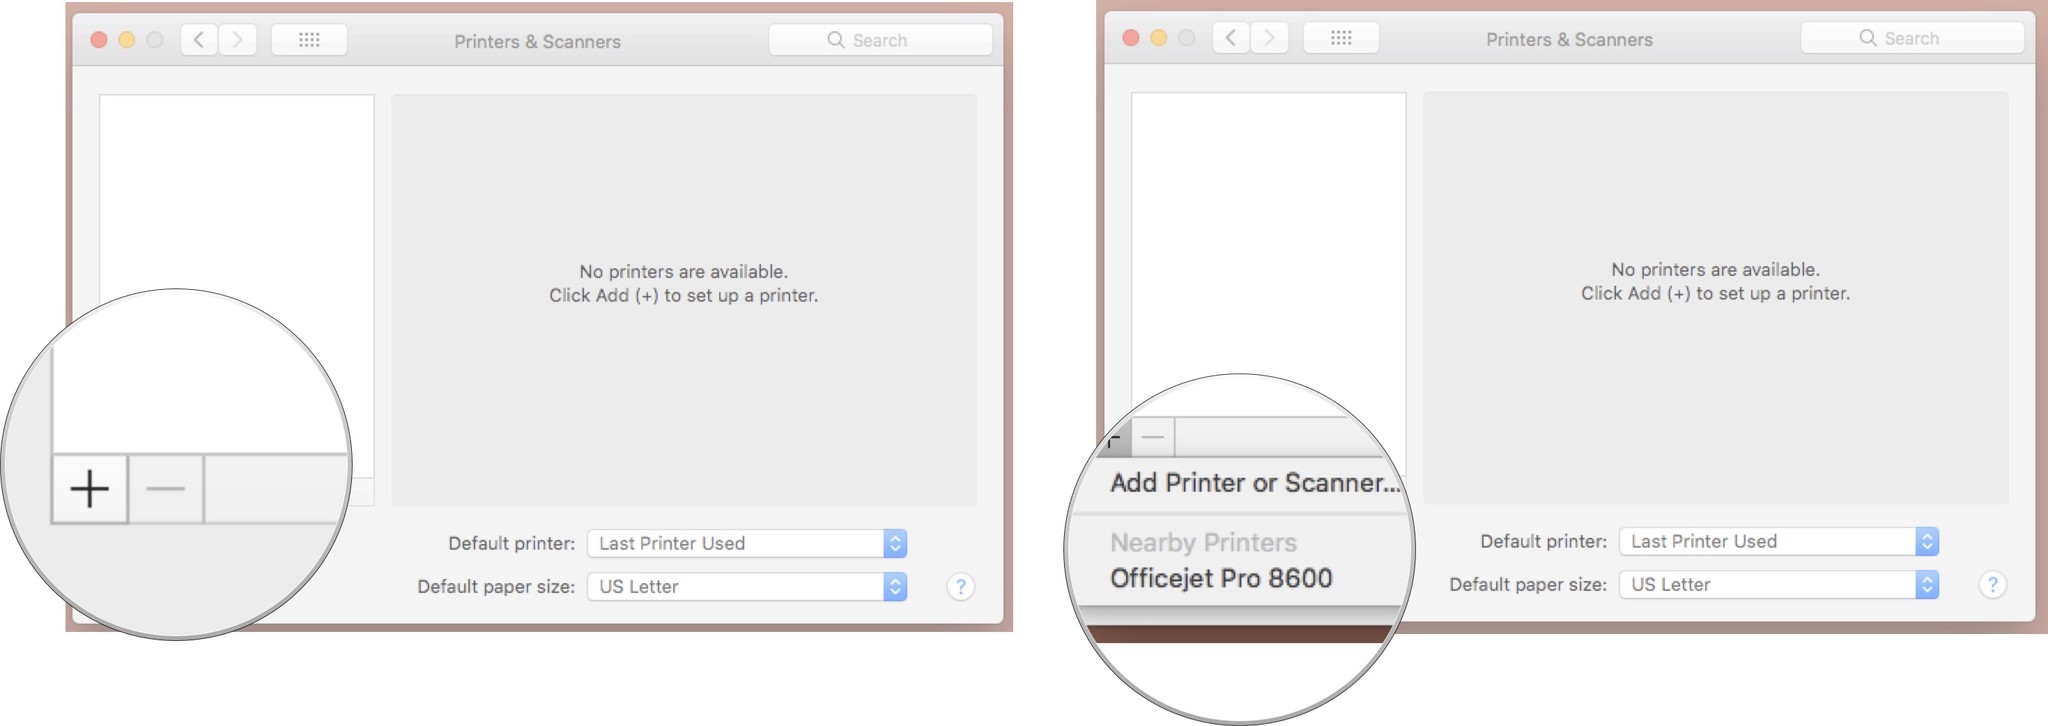 Click on the Add button, then select your printer from the options that appear